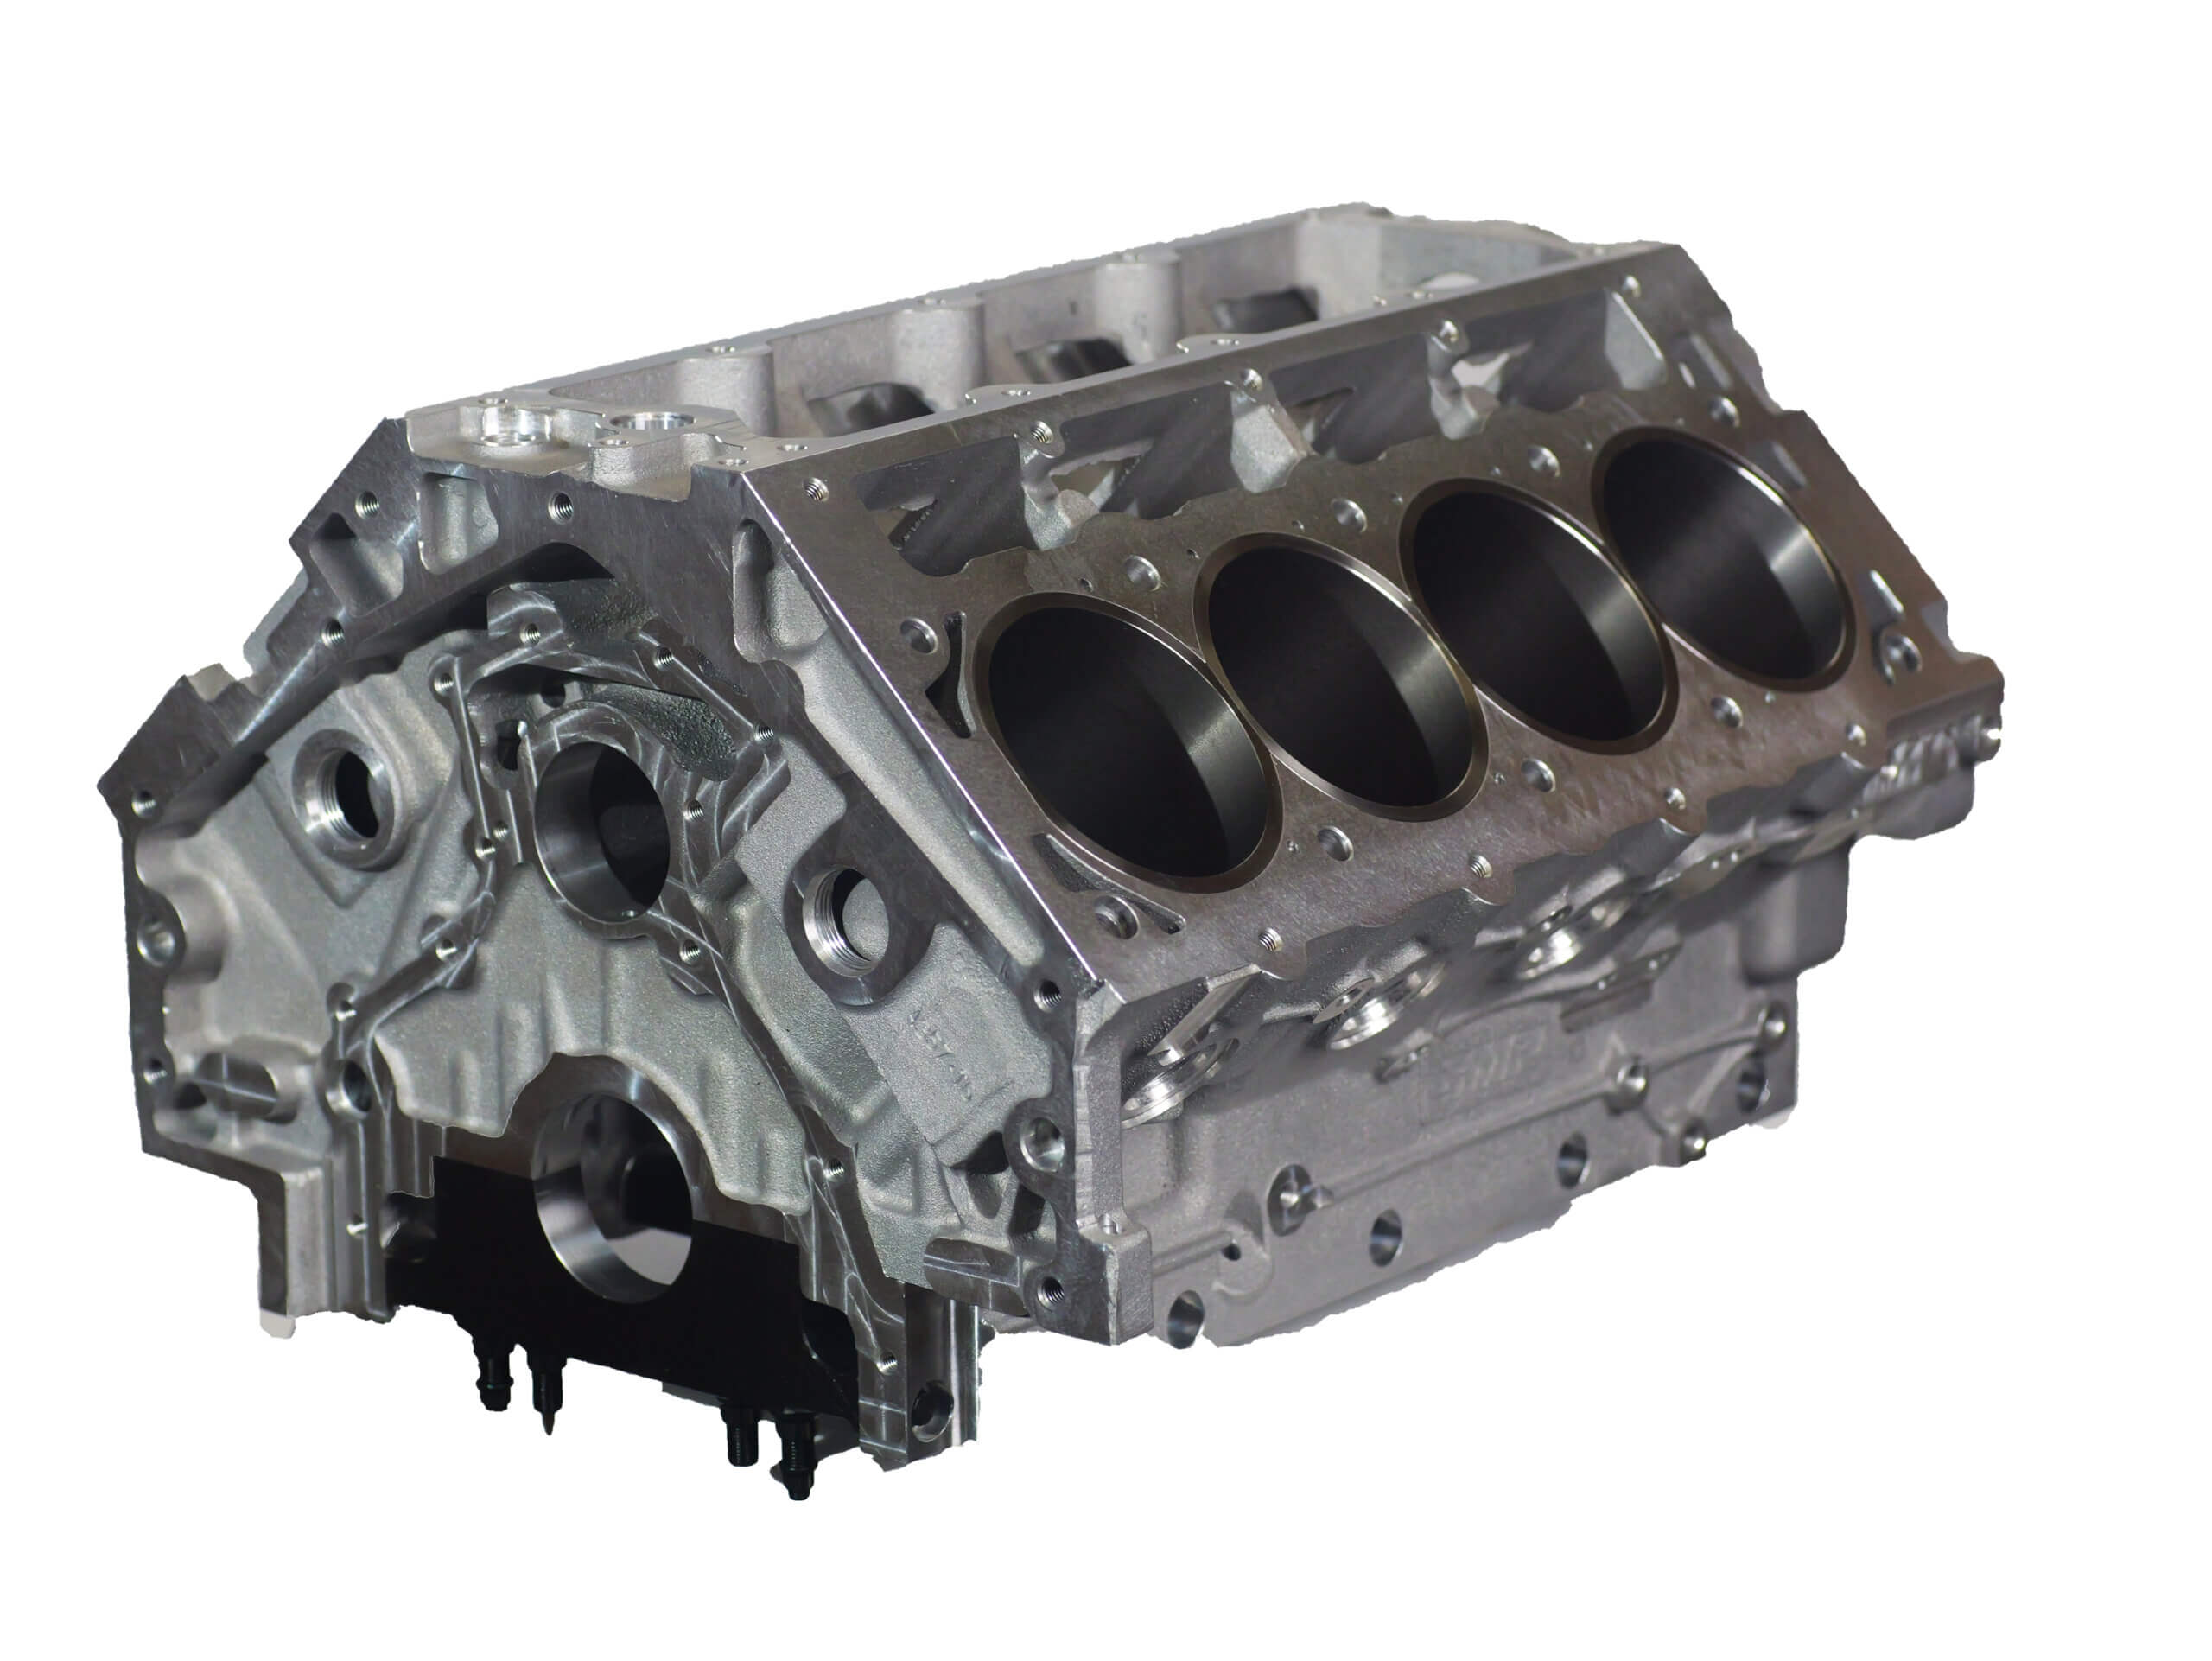 Bill Mitchell Products LSC 357T6 Aluminum Engine Block Chevy LS Series Std Mains, 9.800"Deck, 3.990" Bore, Billet Caps, Standard Cam(includes, Screw in Freeze plugs, Cam plug, All dowel pins and Pipe plugs) 086505